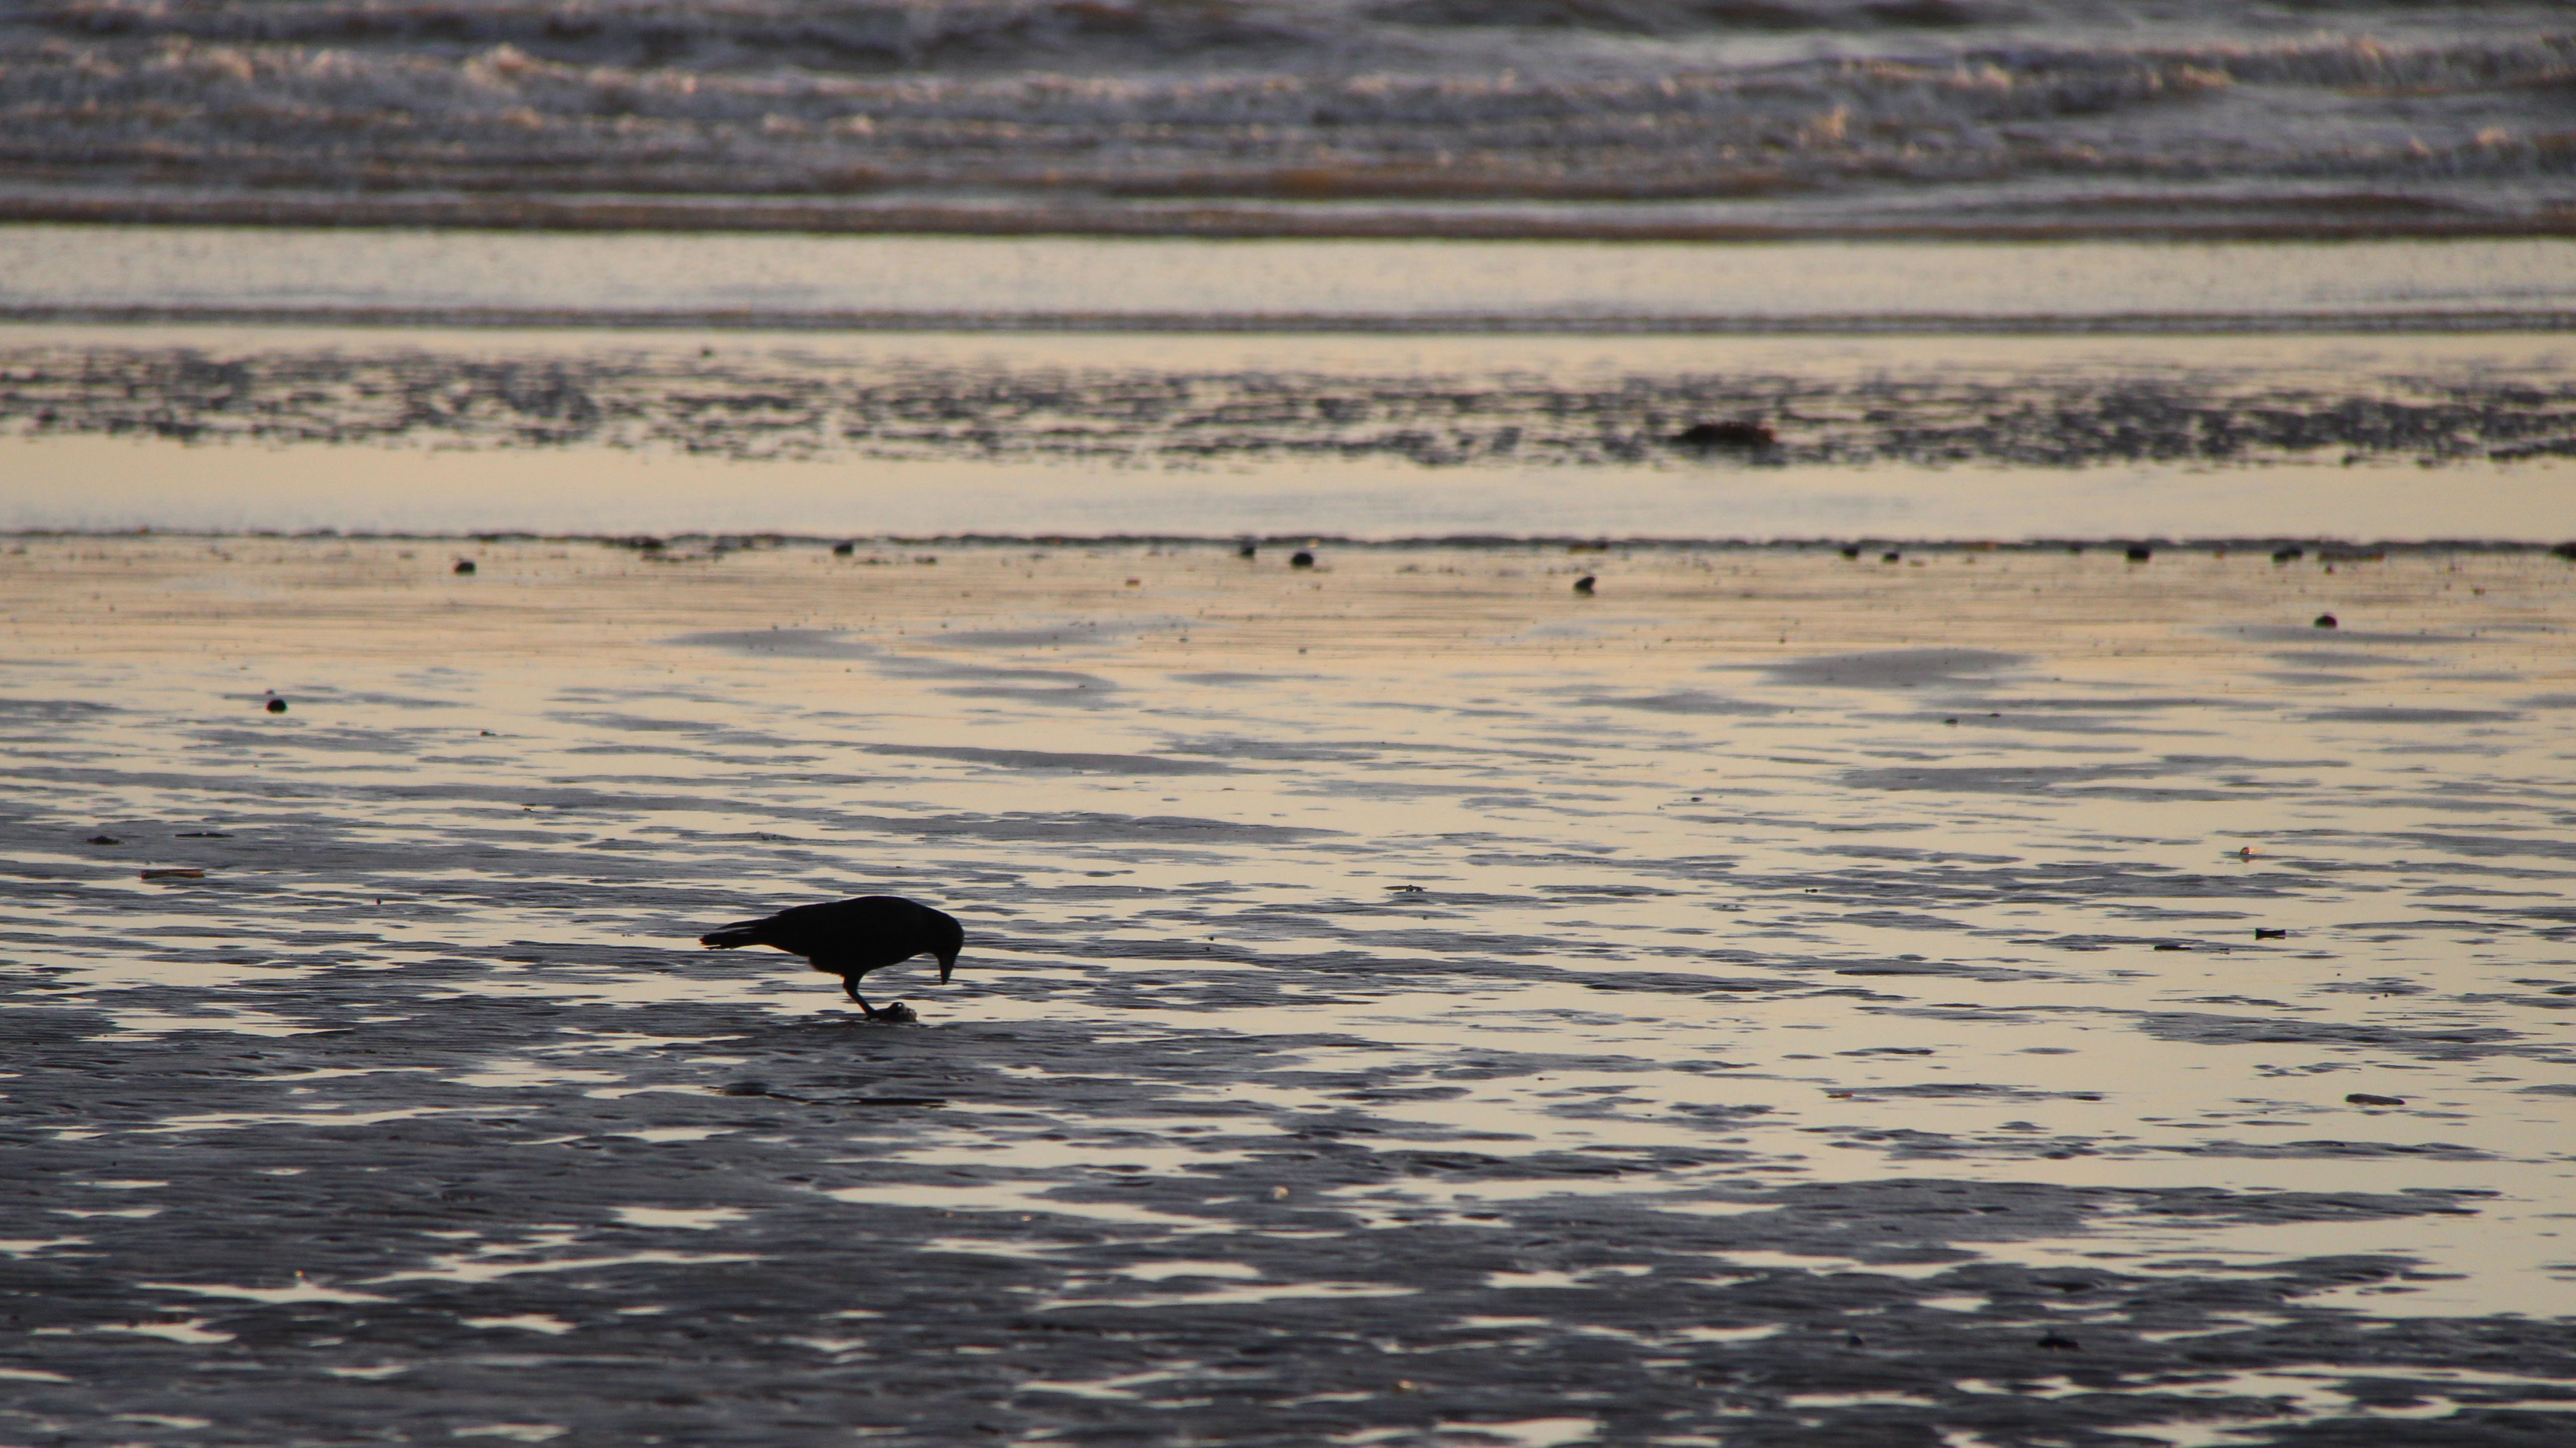 Crow by the sea - Krage ved stranden